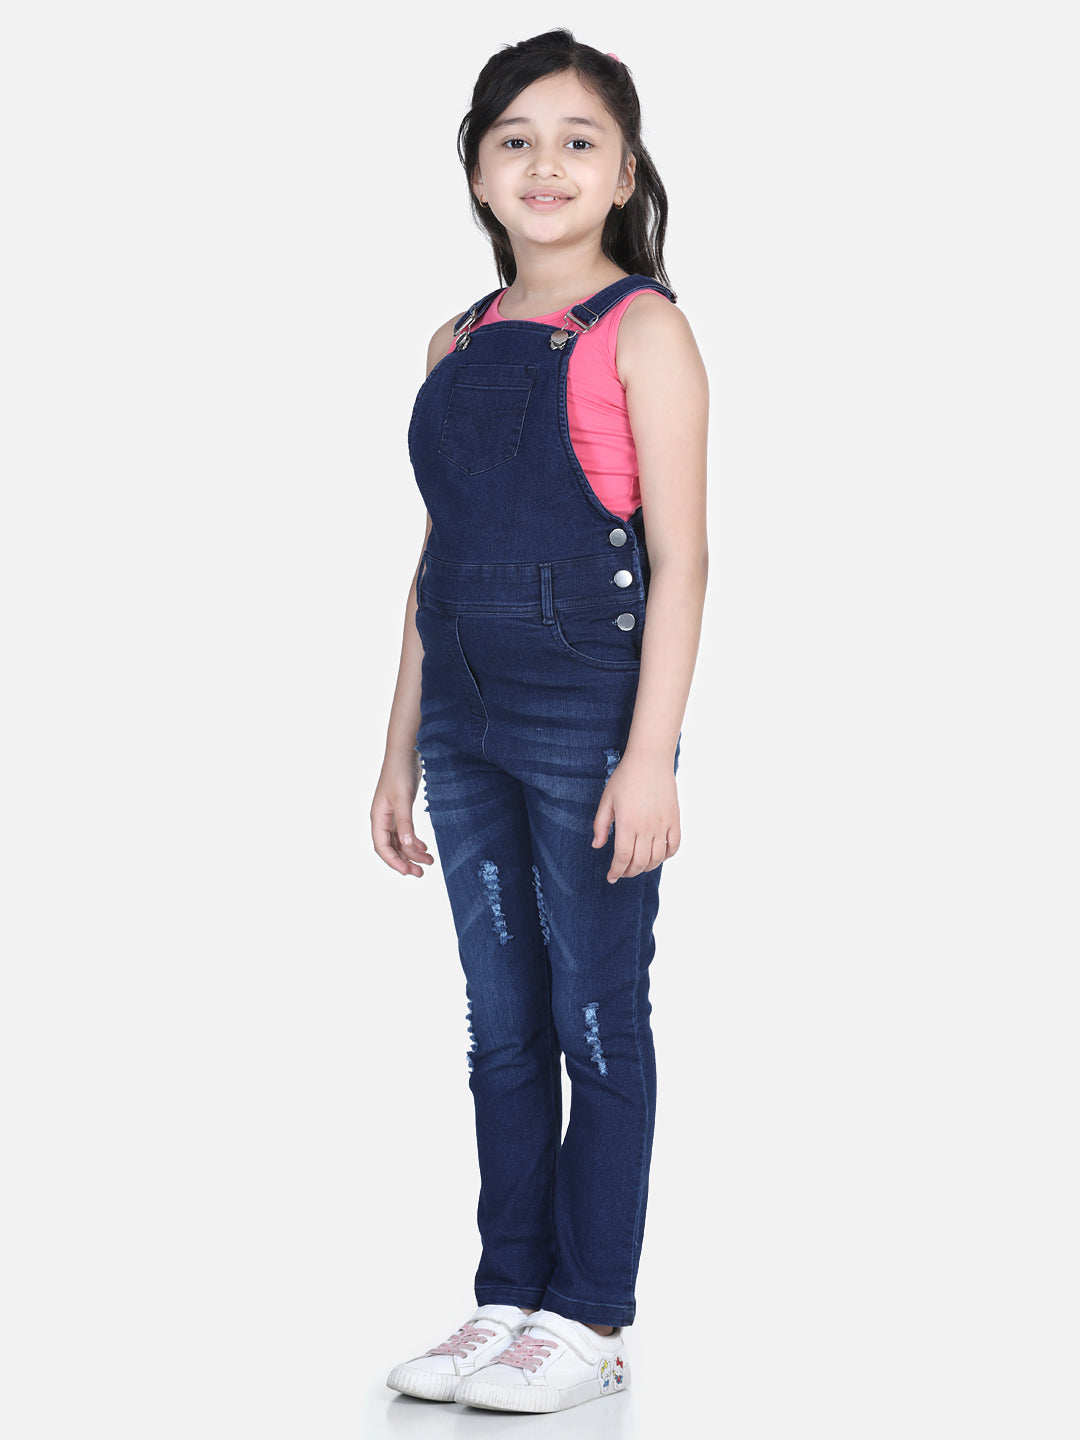 Girls Distressed Denim Dungaree (T-shirt not included)